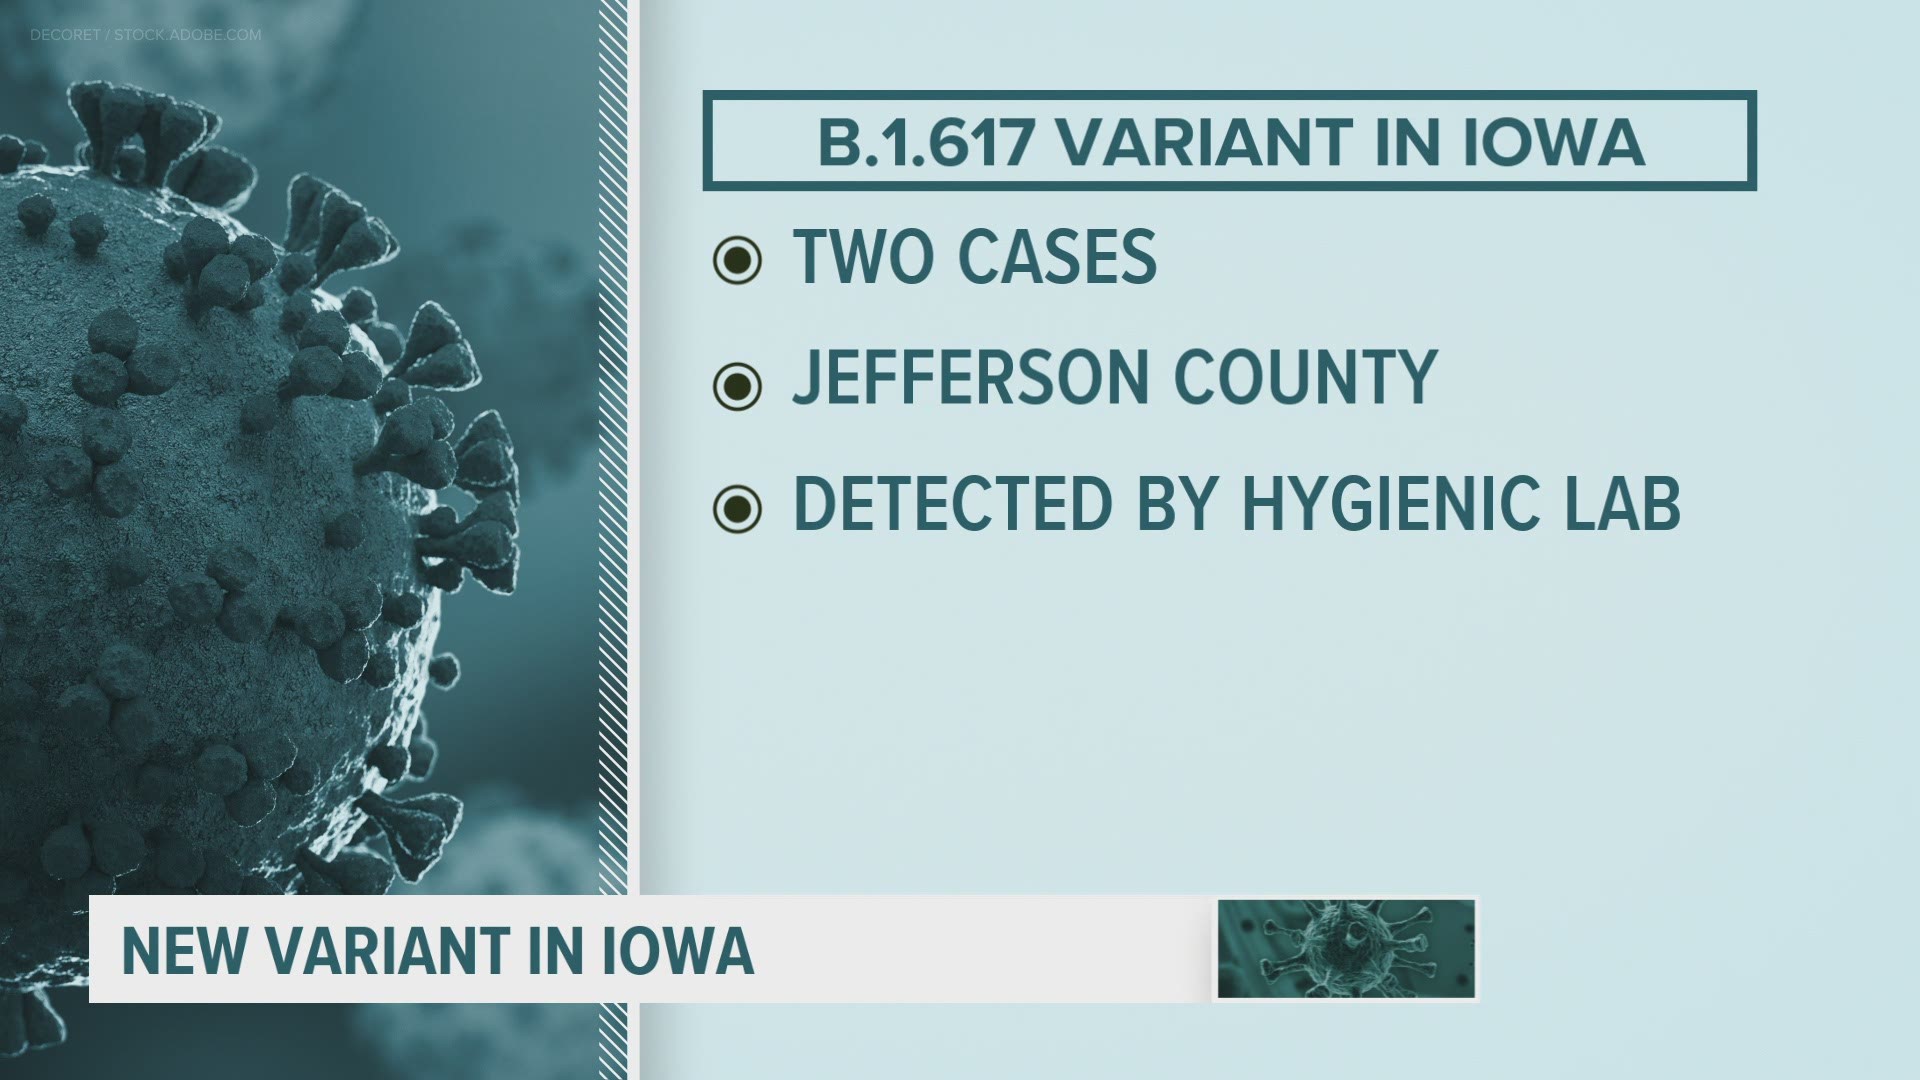 Two individuals in Jefferson County have been diagnosed with the B.1.617 variant, which originated in India.